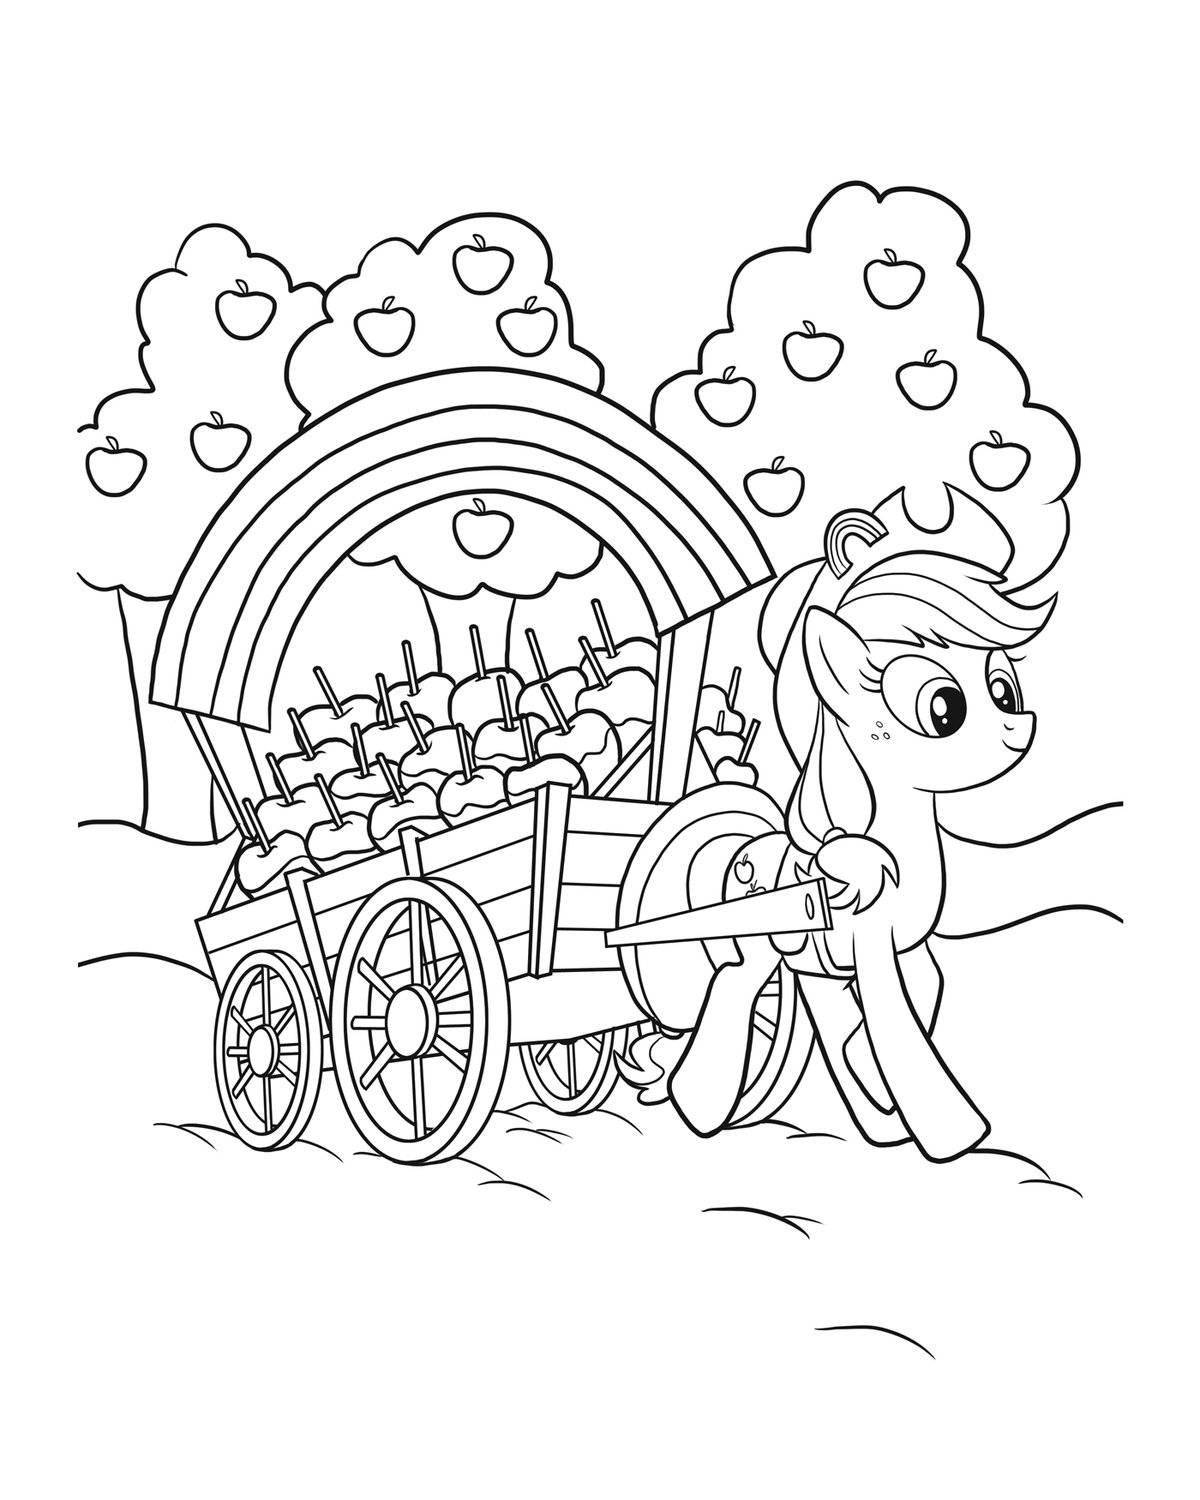 Applejack animated coloring book